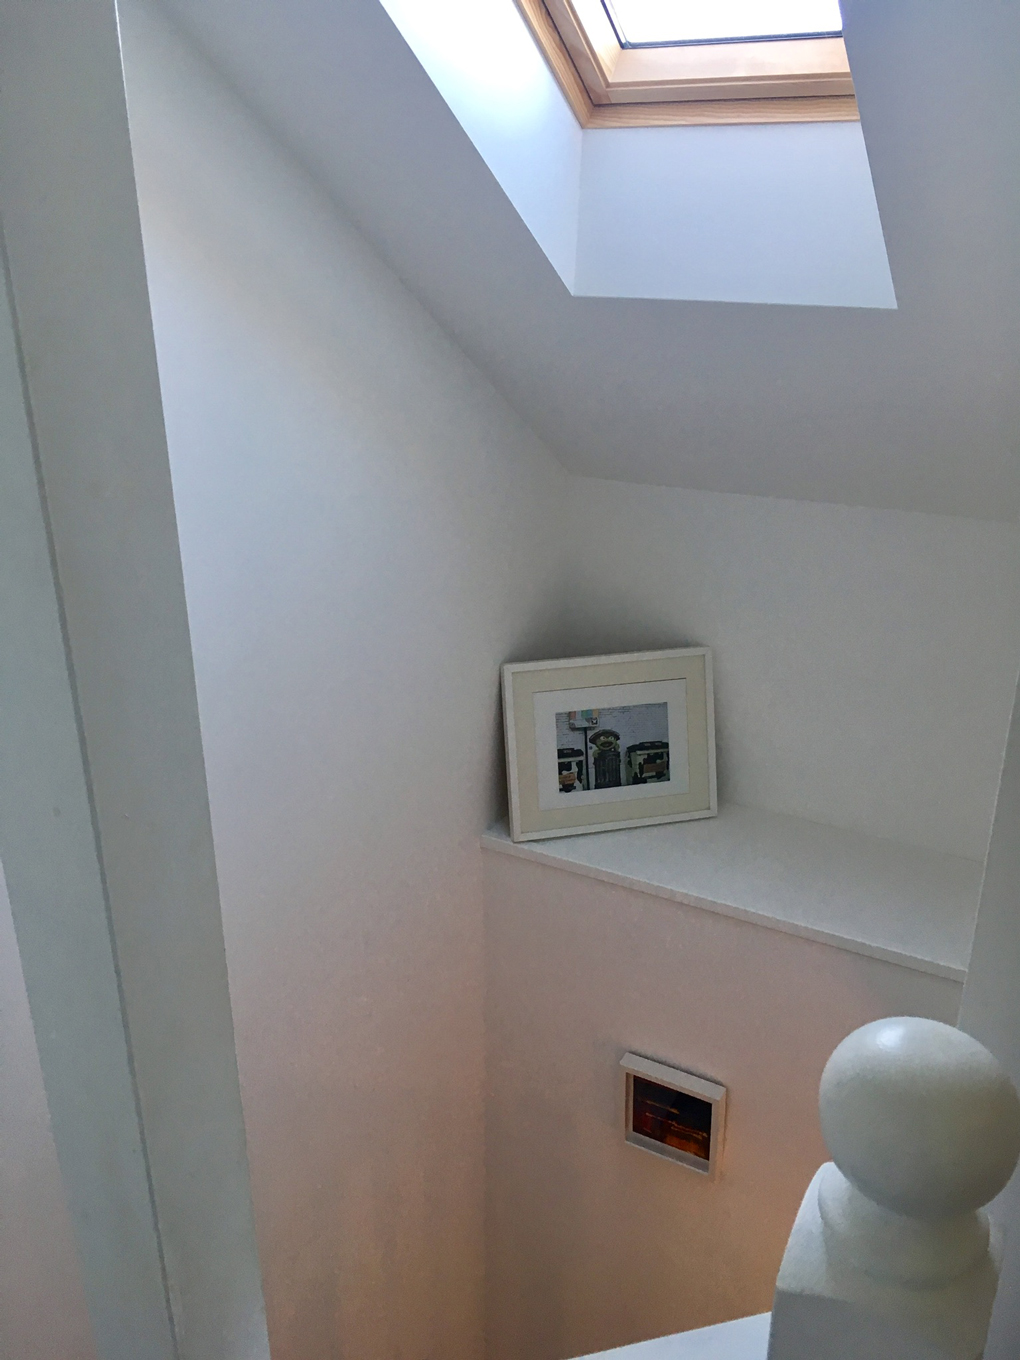 Dormer loft conversion - stairs in Walthamstow